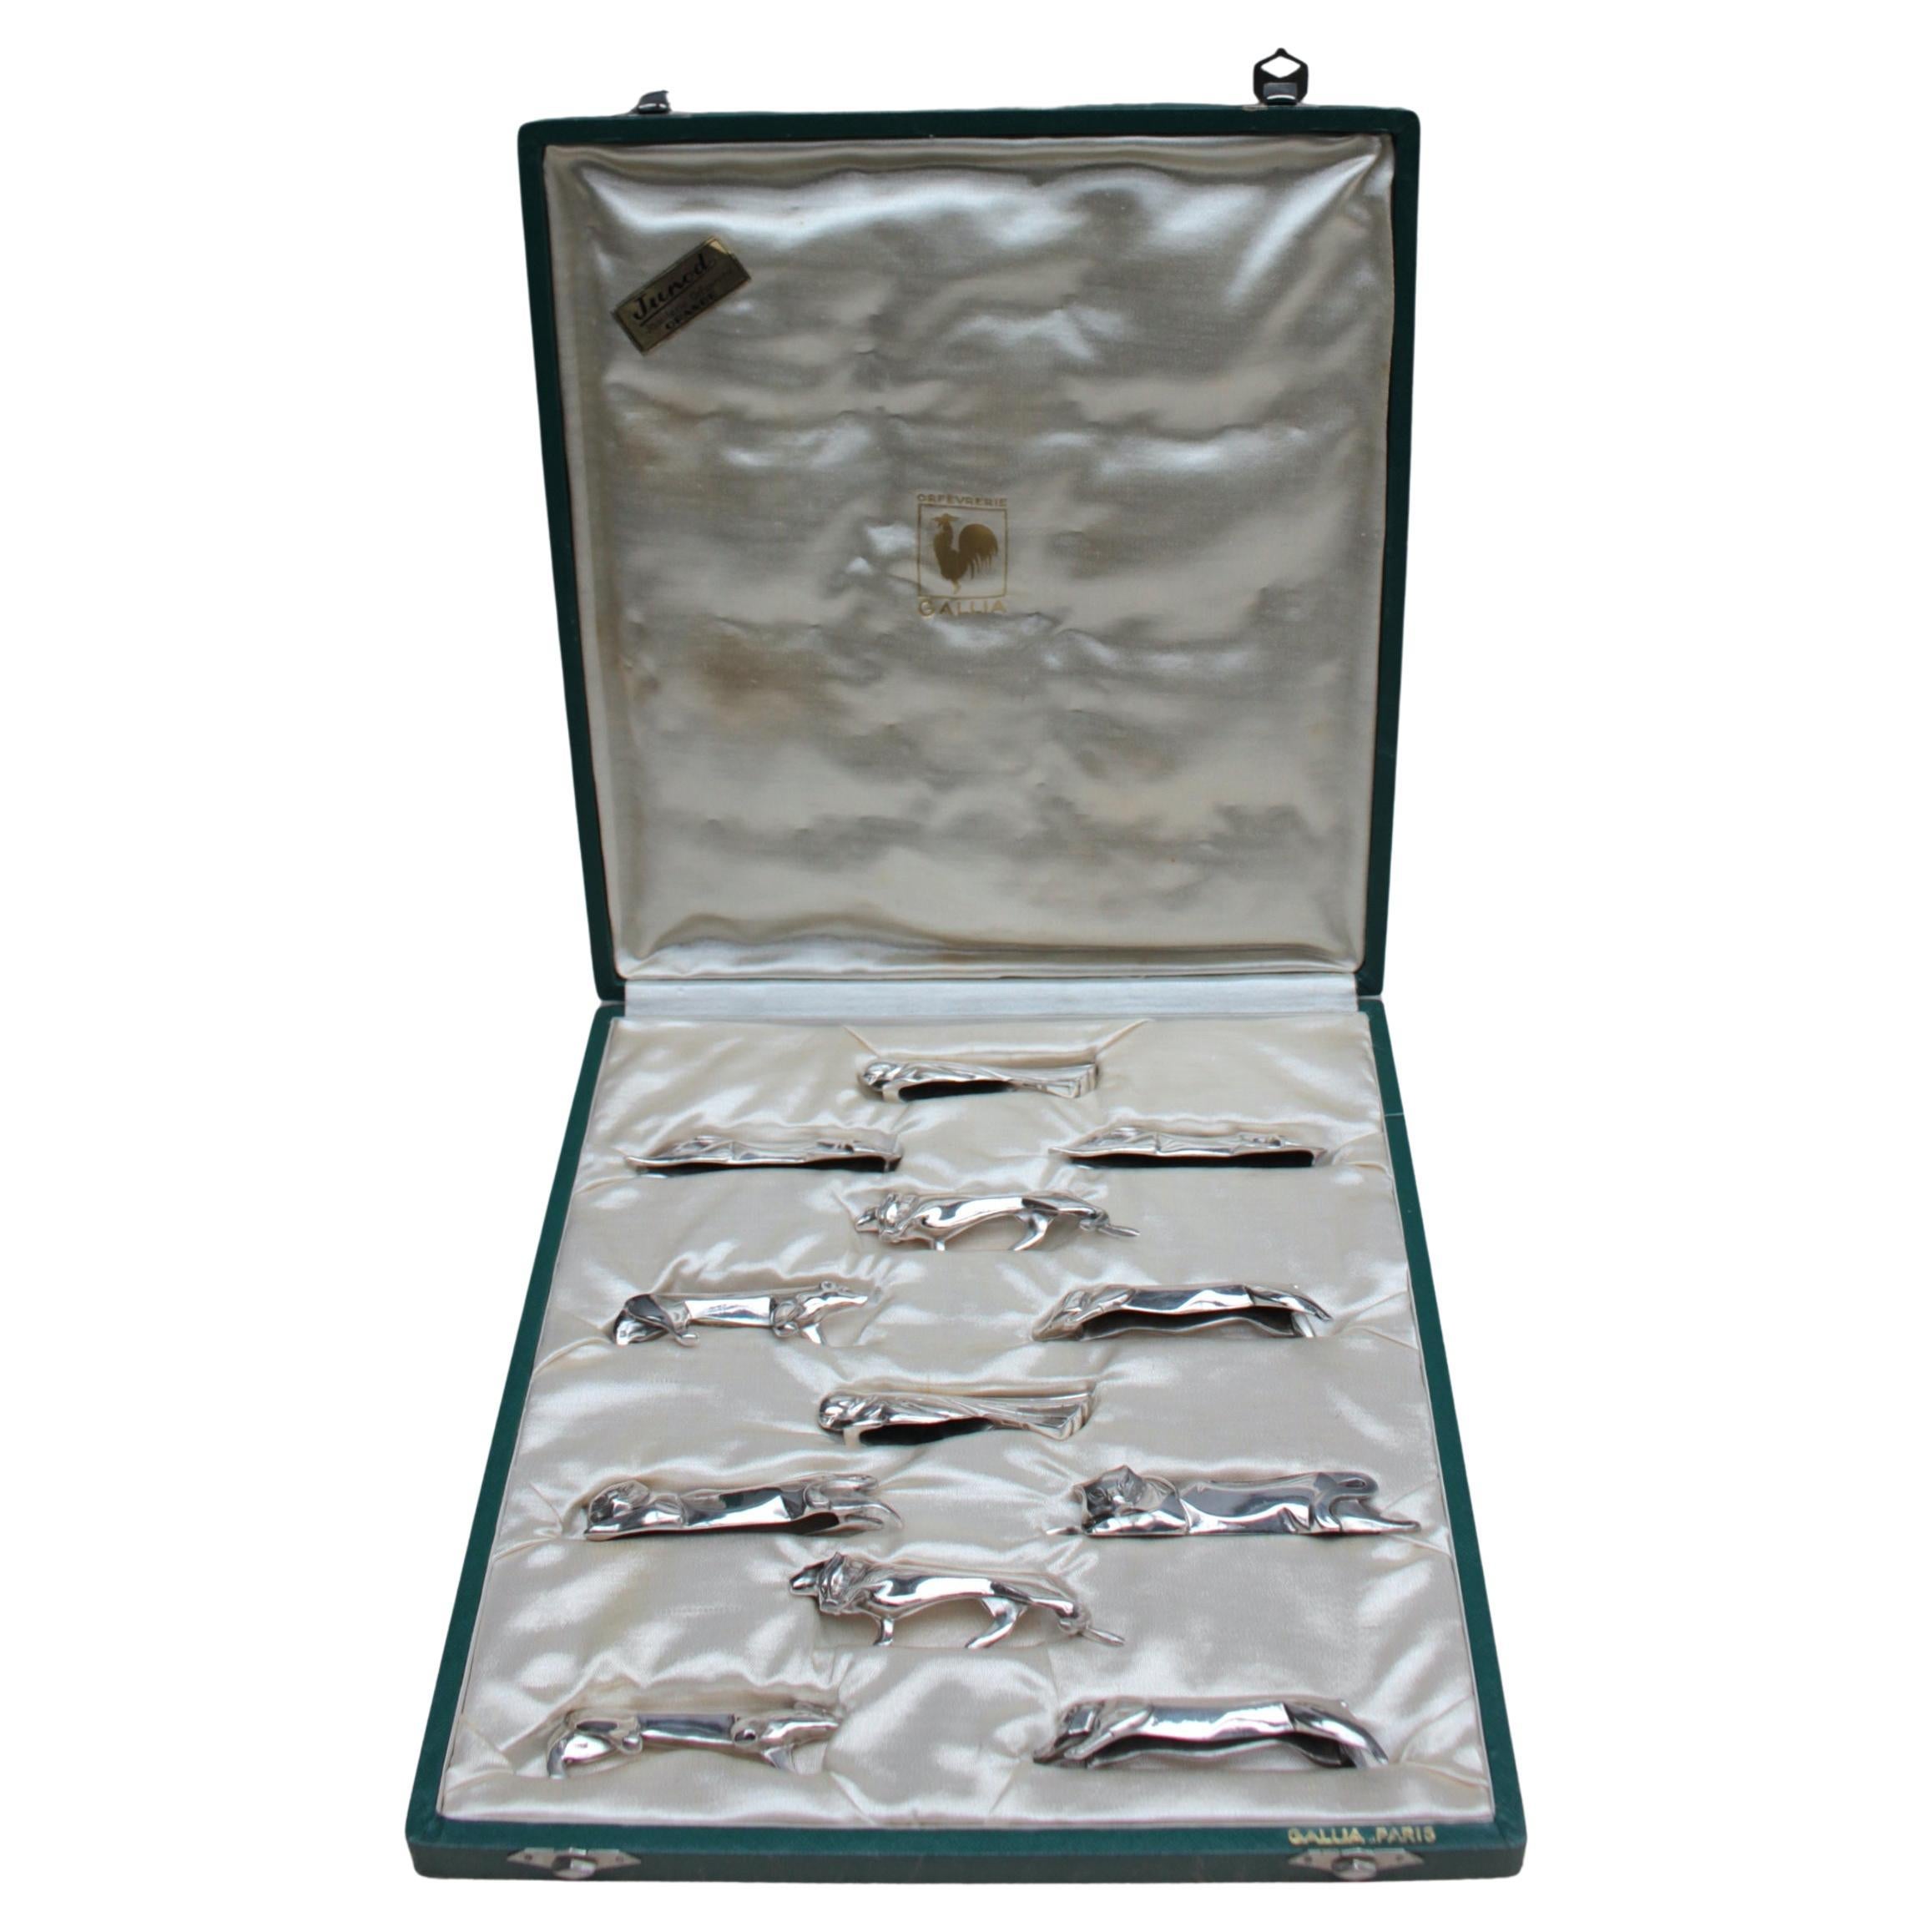 Set of 12 Fine French Art Deco Silver plated "Gallia" Knife Rests by Christofle